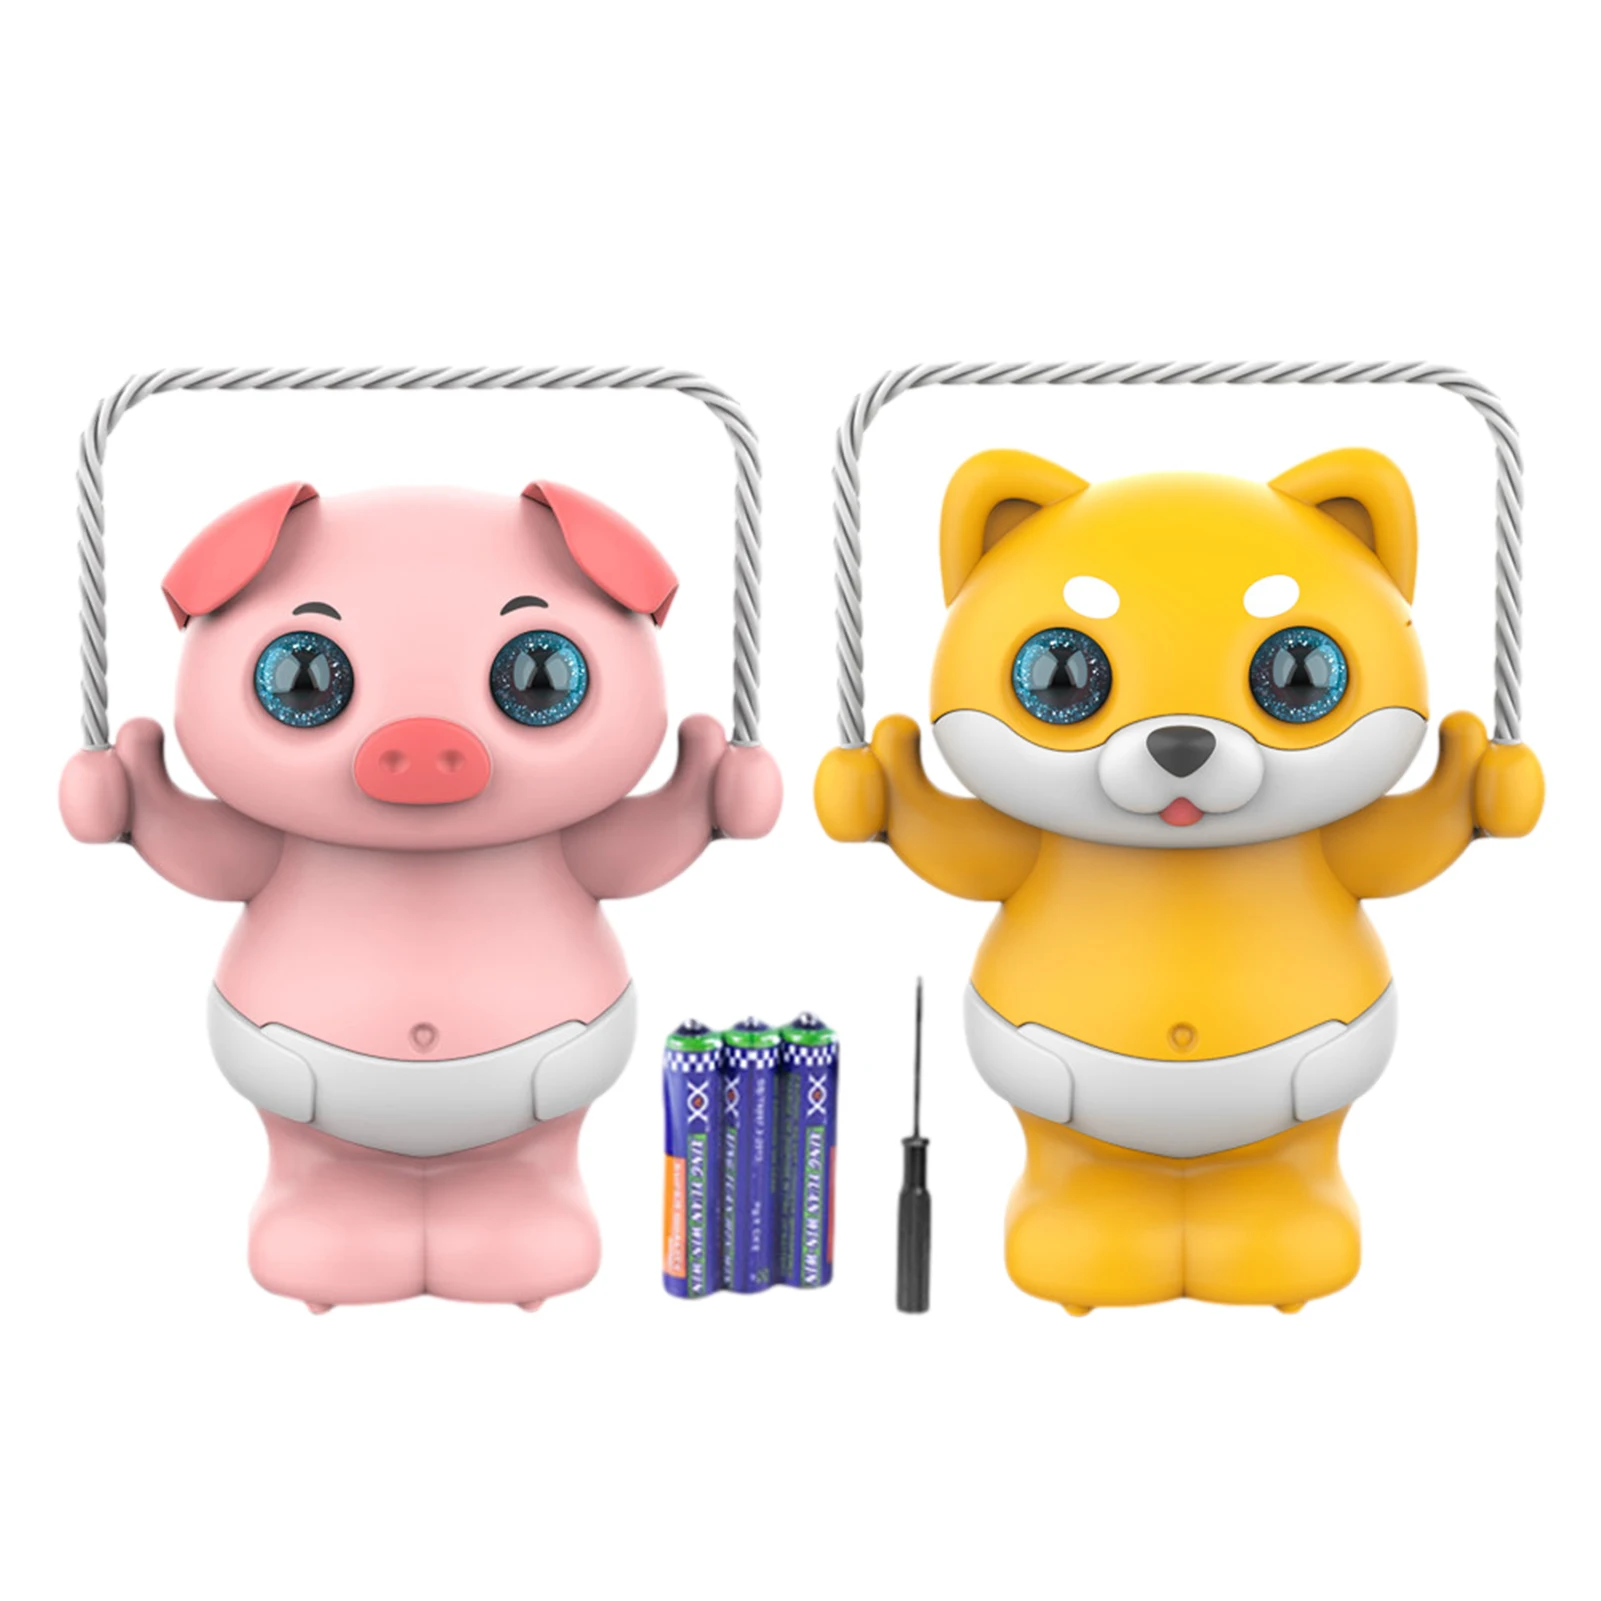 

Children's Light Music Cute Pet Dancing Electric Toy Clap Your Hands to Wake Up Dumping Voice Control Skipping Piggy